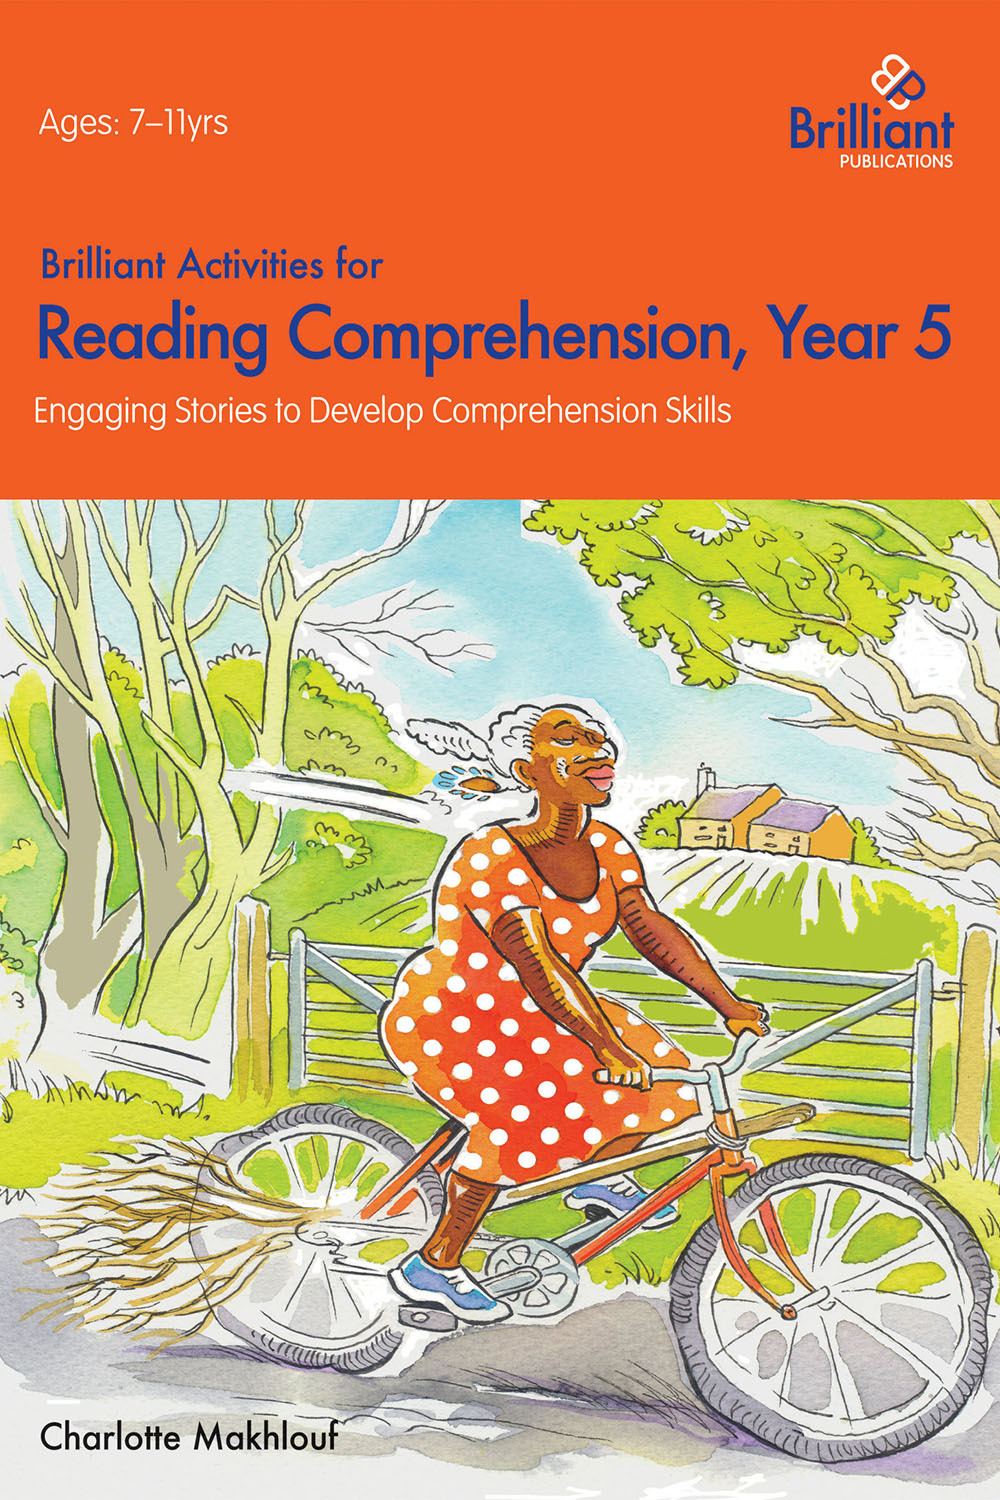 Makhlouf, Charlotte - Brilliant Activities for Reading Comprehension Year 5, ebook